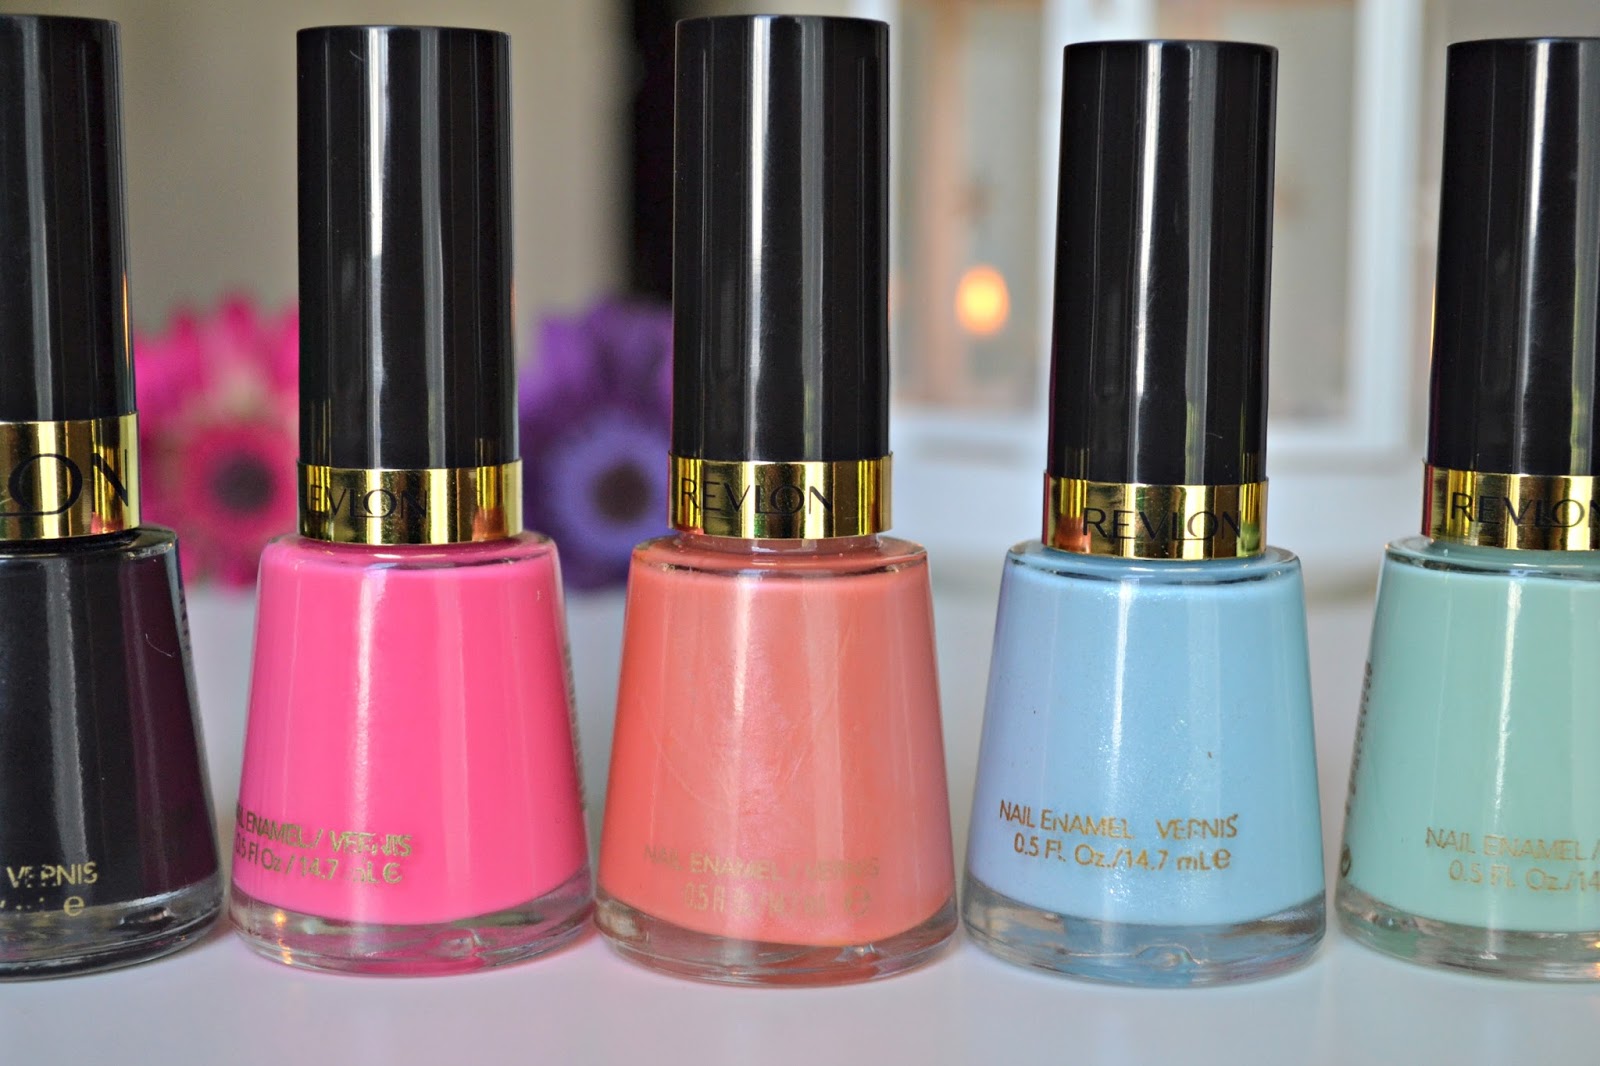 6. "Color Therapy" Nail Polish by Revlon - wide 5